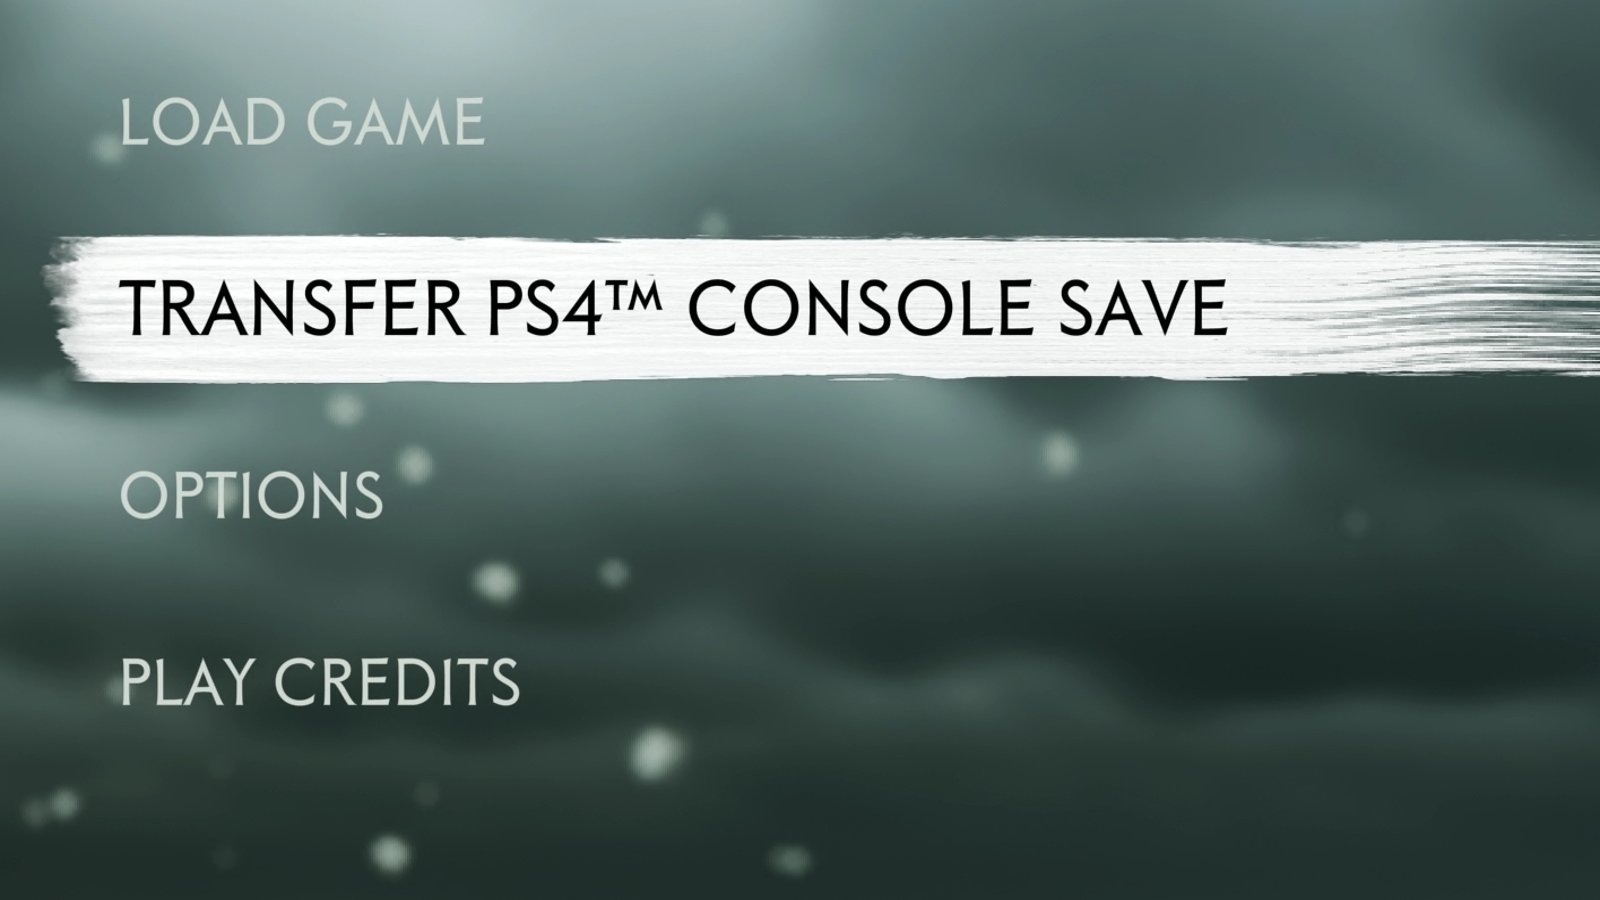 Notice on Cross-Save Function Between Account for PSN and